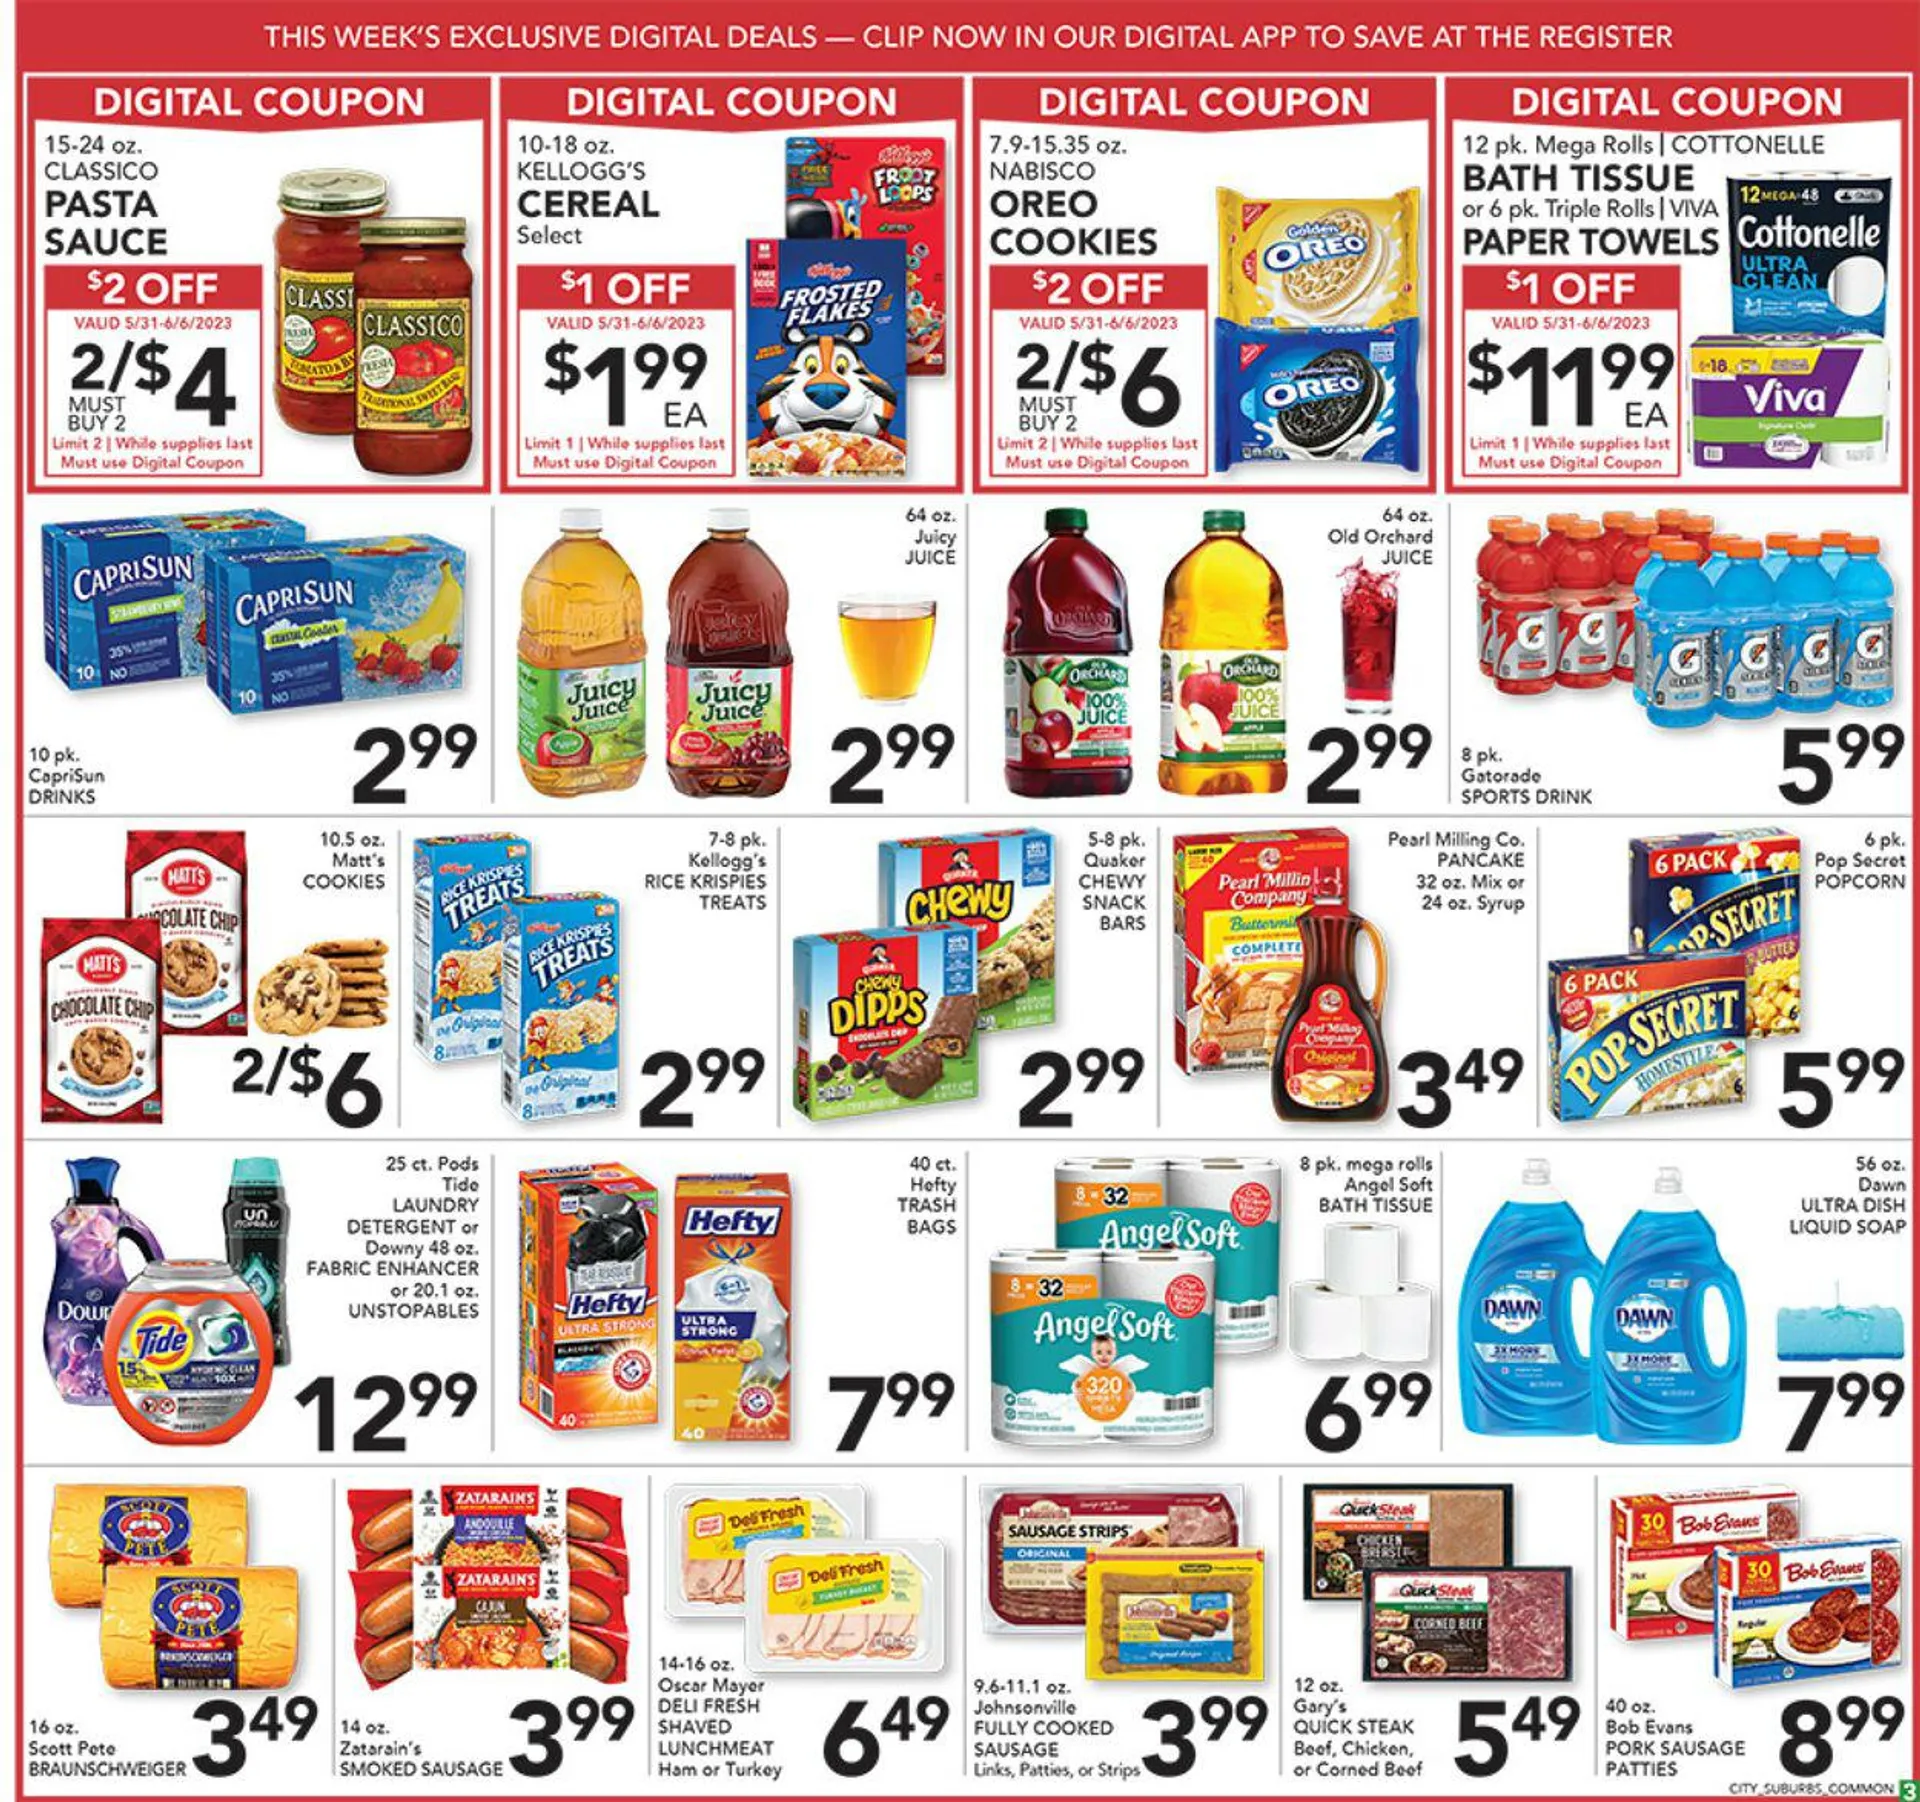 Petes Fresh Market Current weekly ad - 3